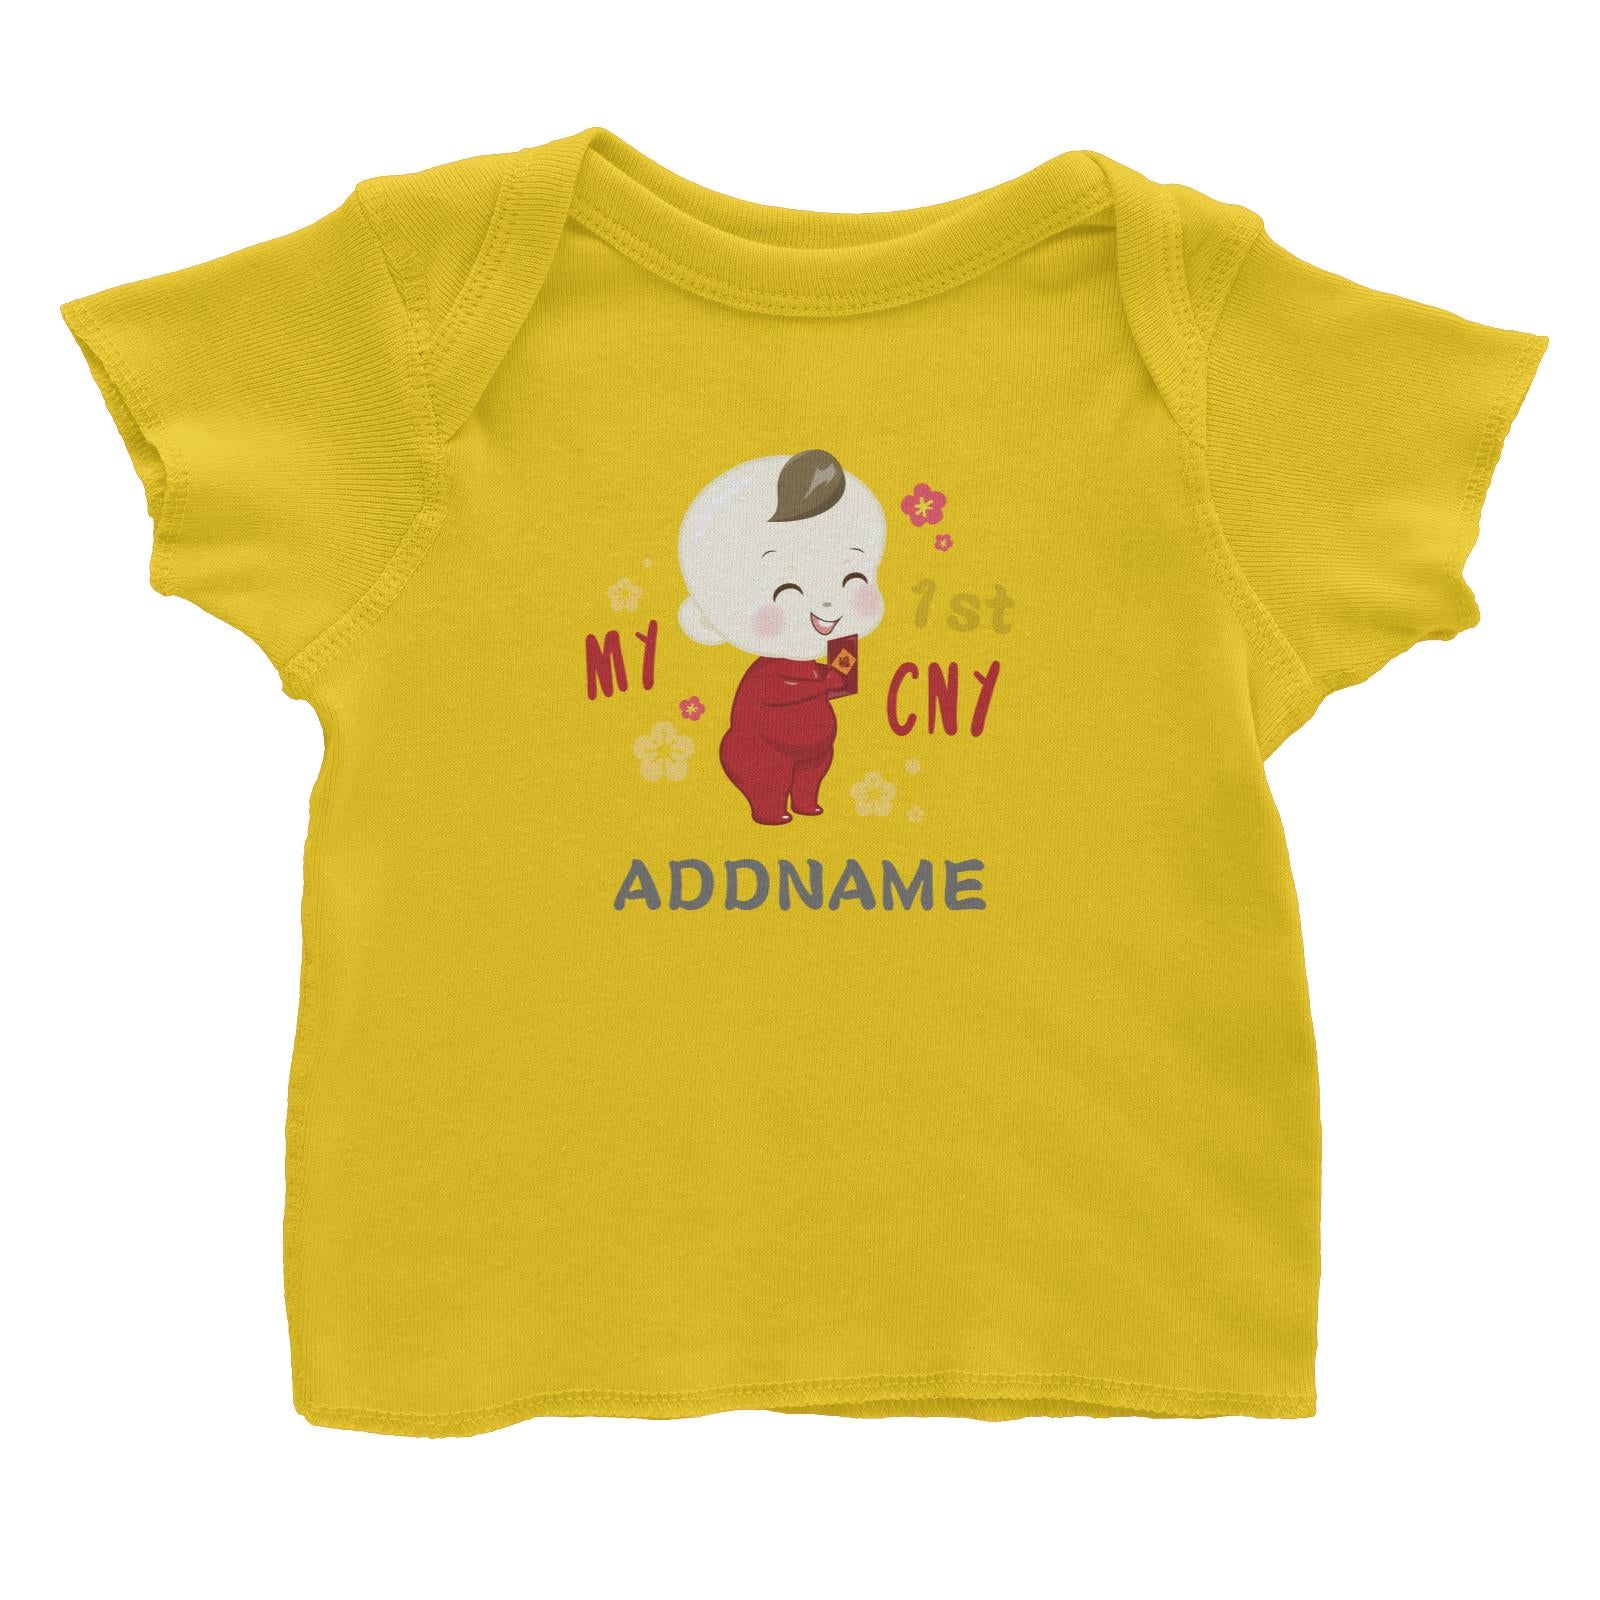 Chinese New Year Family My 1st CNY Baby Boy Addname Baby T-Shirt